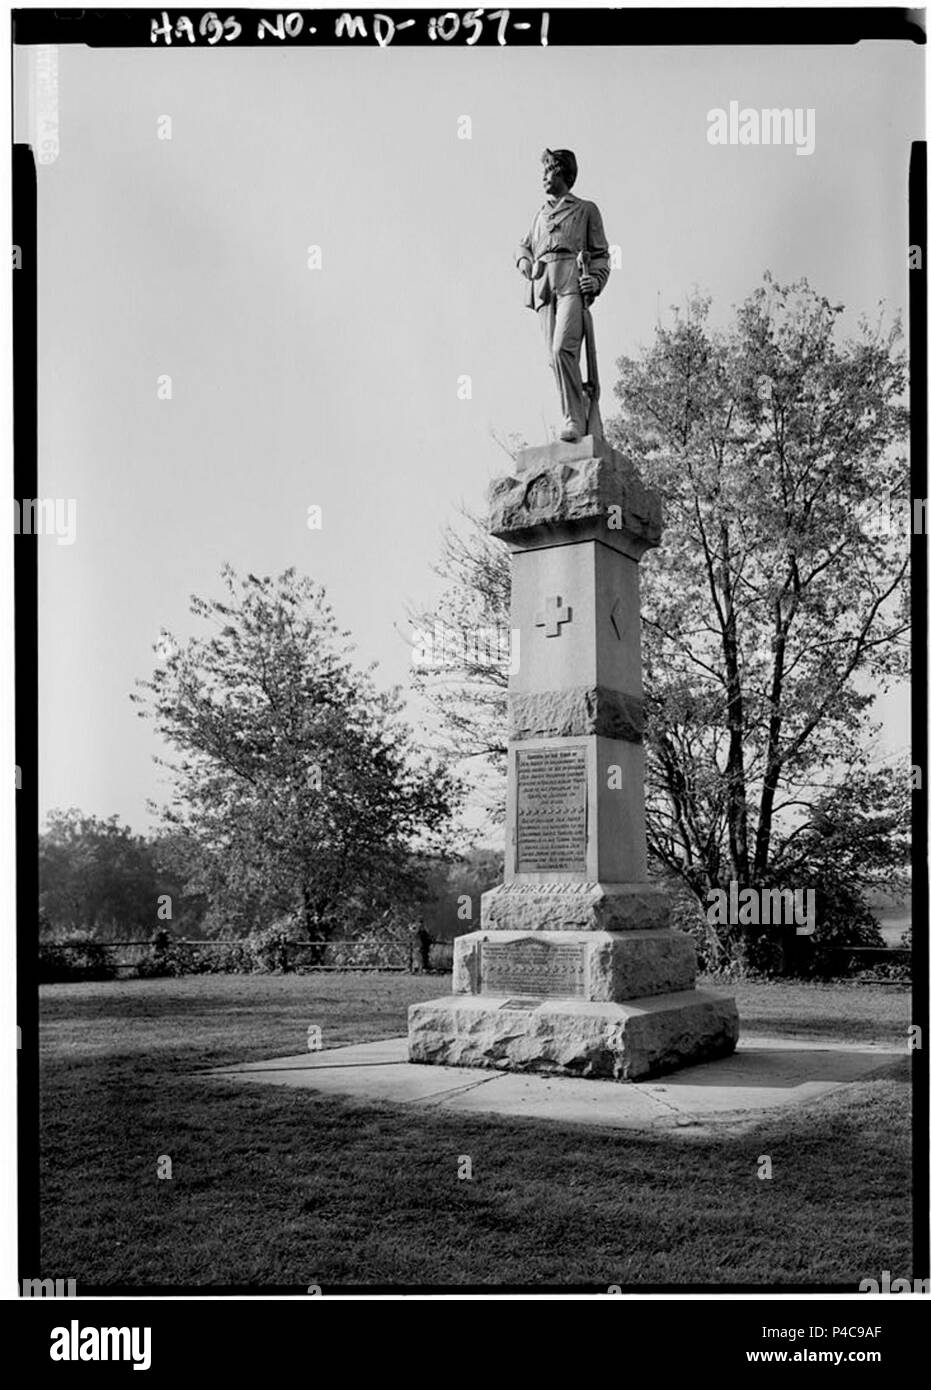 14th Regiment New Jersey Volunteer Infantry Monument 081696pv. Stock Photo